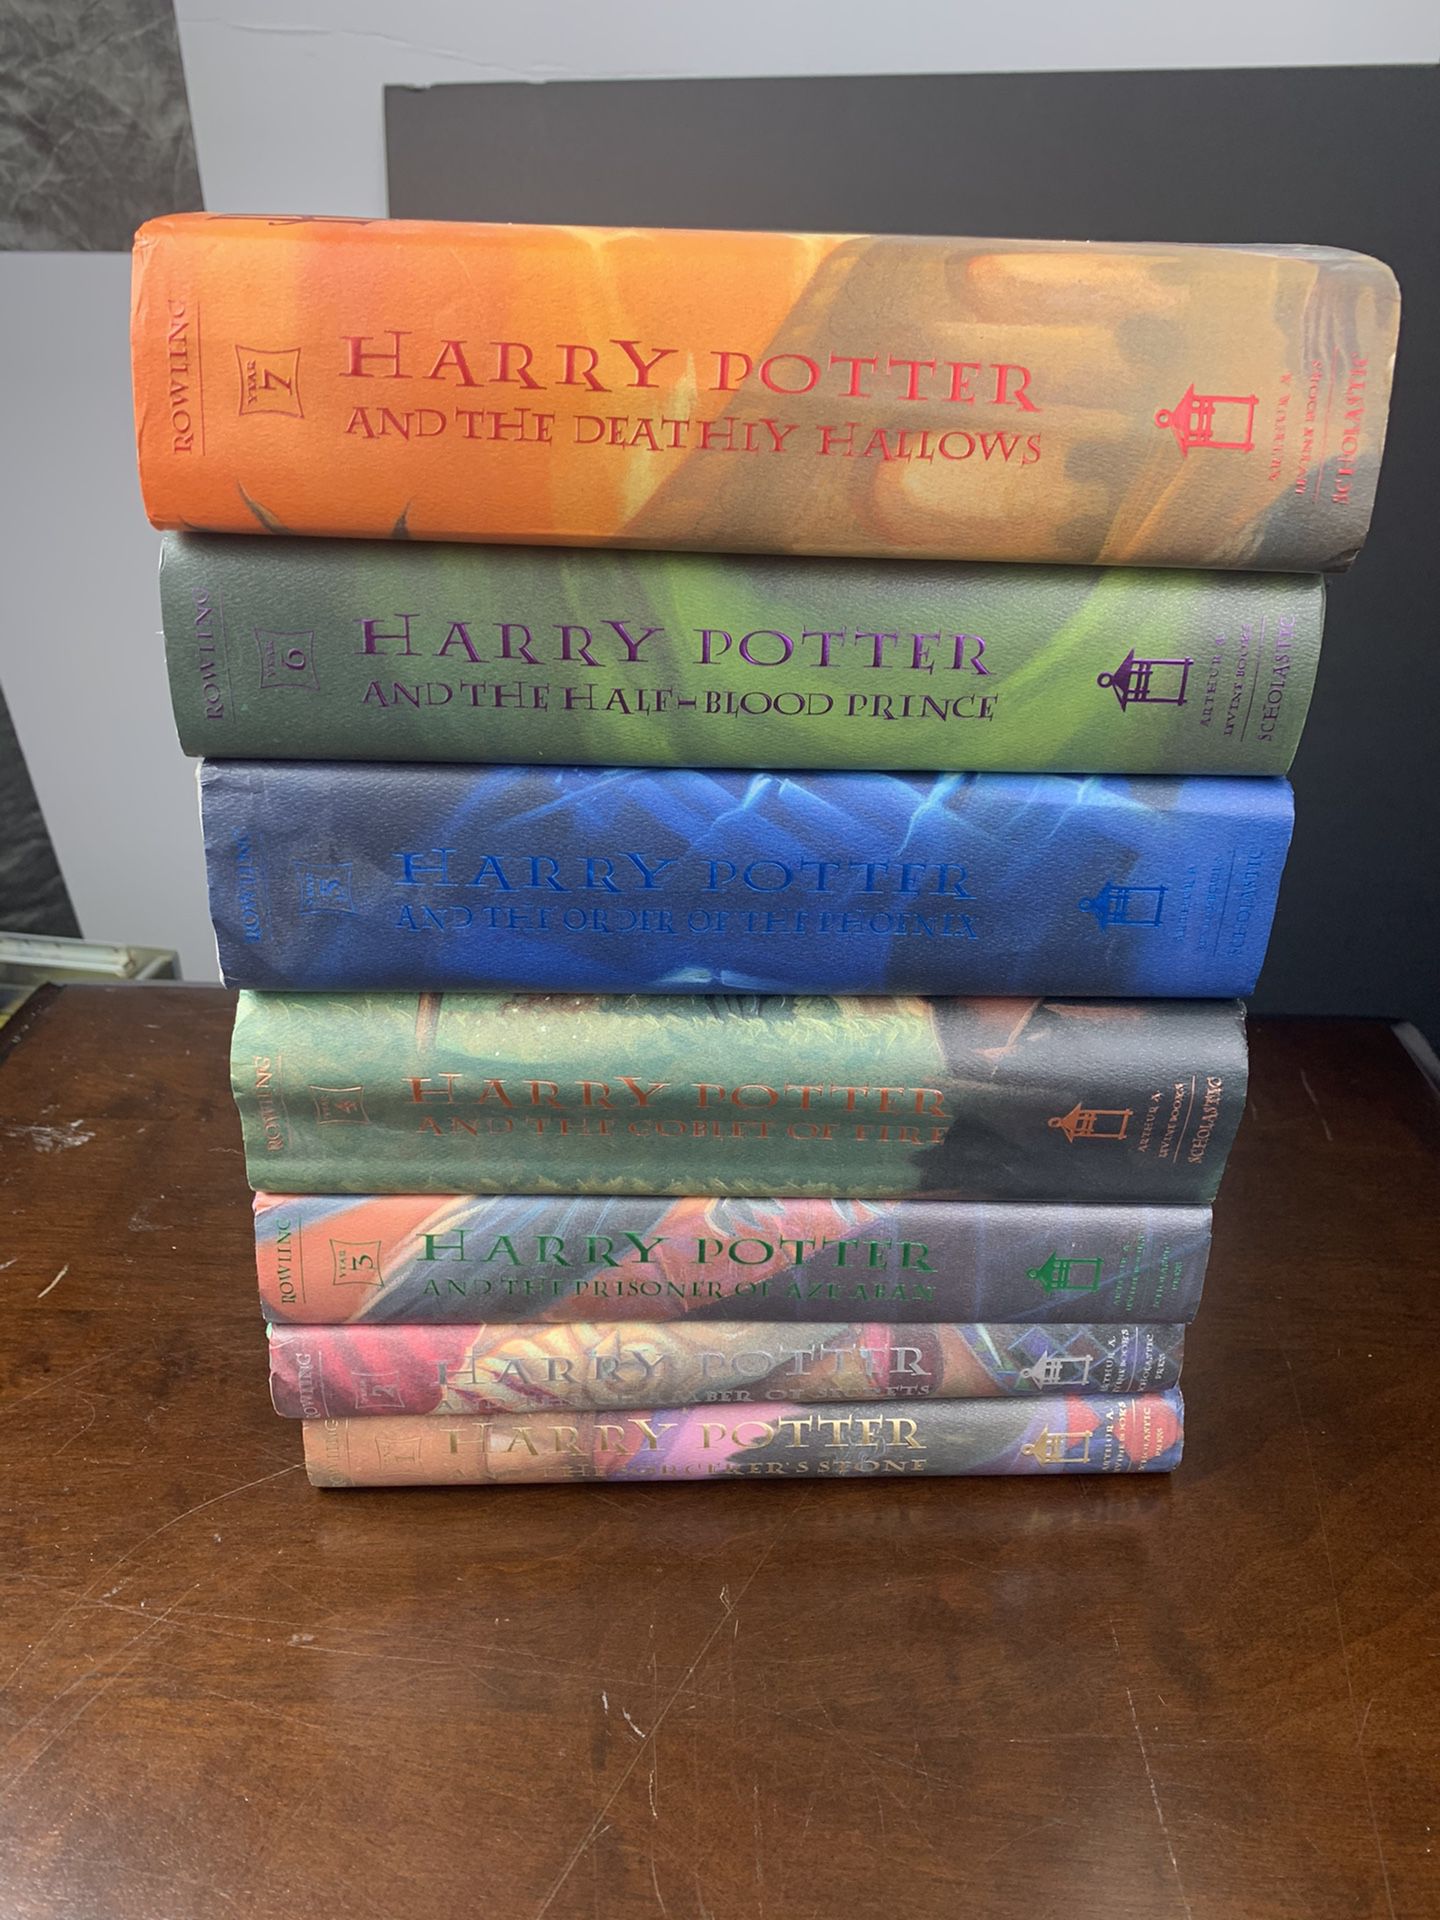 Harry potter hardcover books set 1-7 first ed.